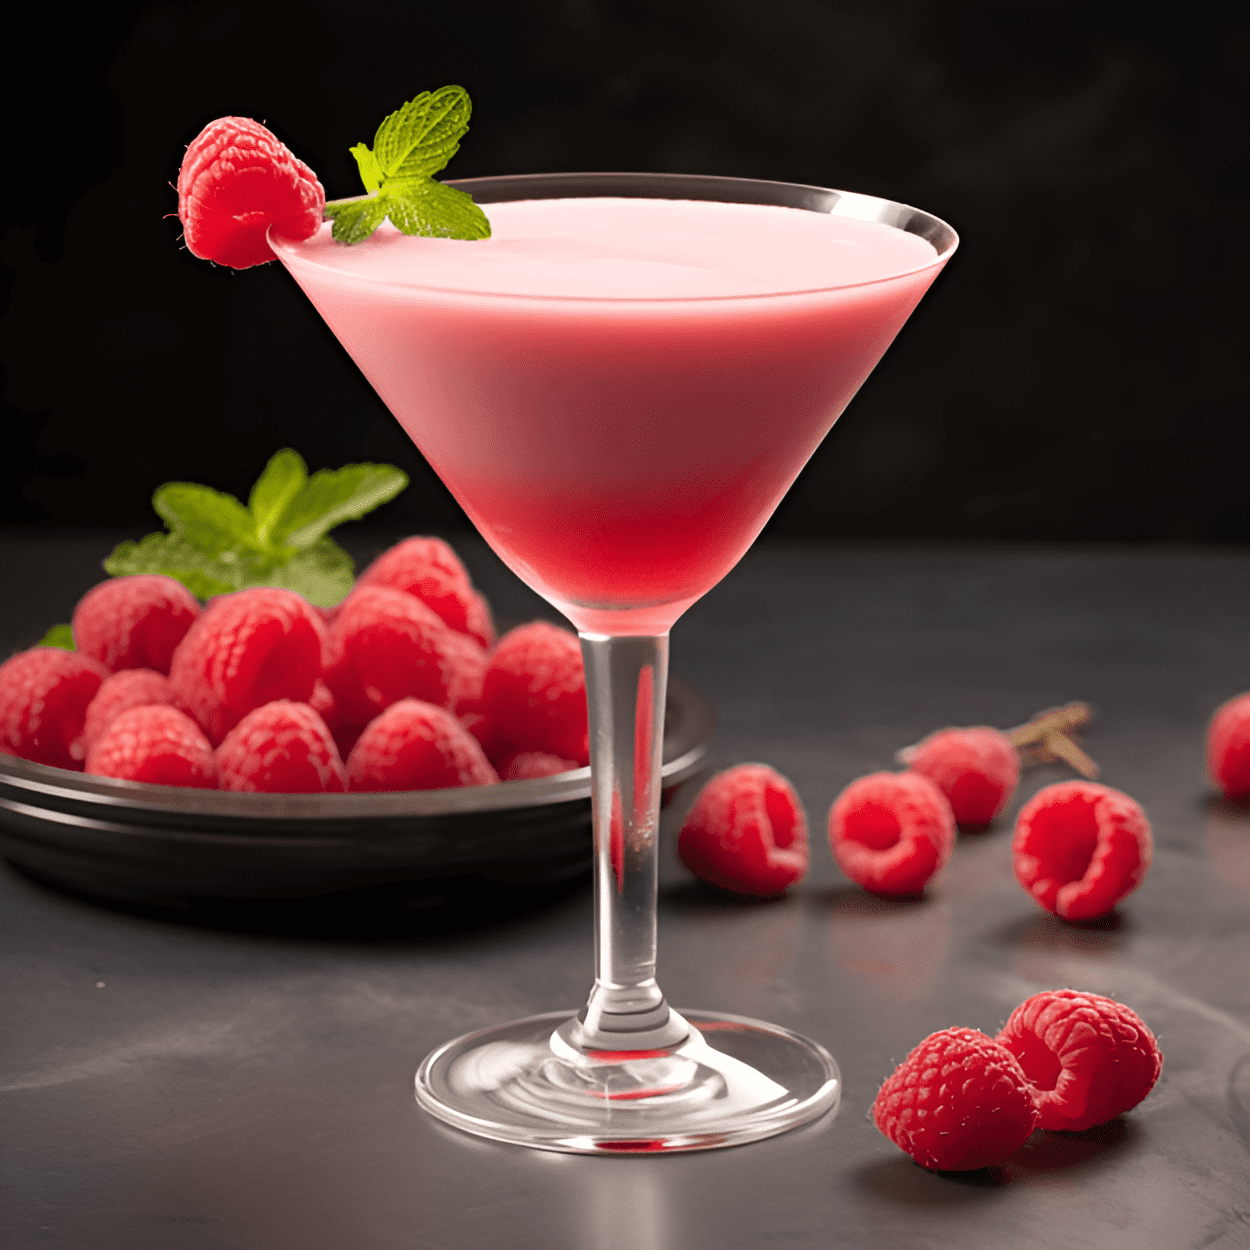 French Kiss Cocktail Recipe - The French Kiss cocktail has a sweet and fruity taste, with a hint of chocolate. The raspberry liqueur adds a tangy and fruity flavor, while the chocolate liqueur gives it a rich and creamy taste. The vodka adds a bit of a kick, but it's not too overpowering.